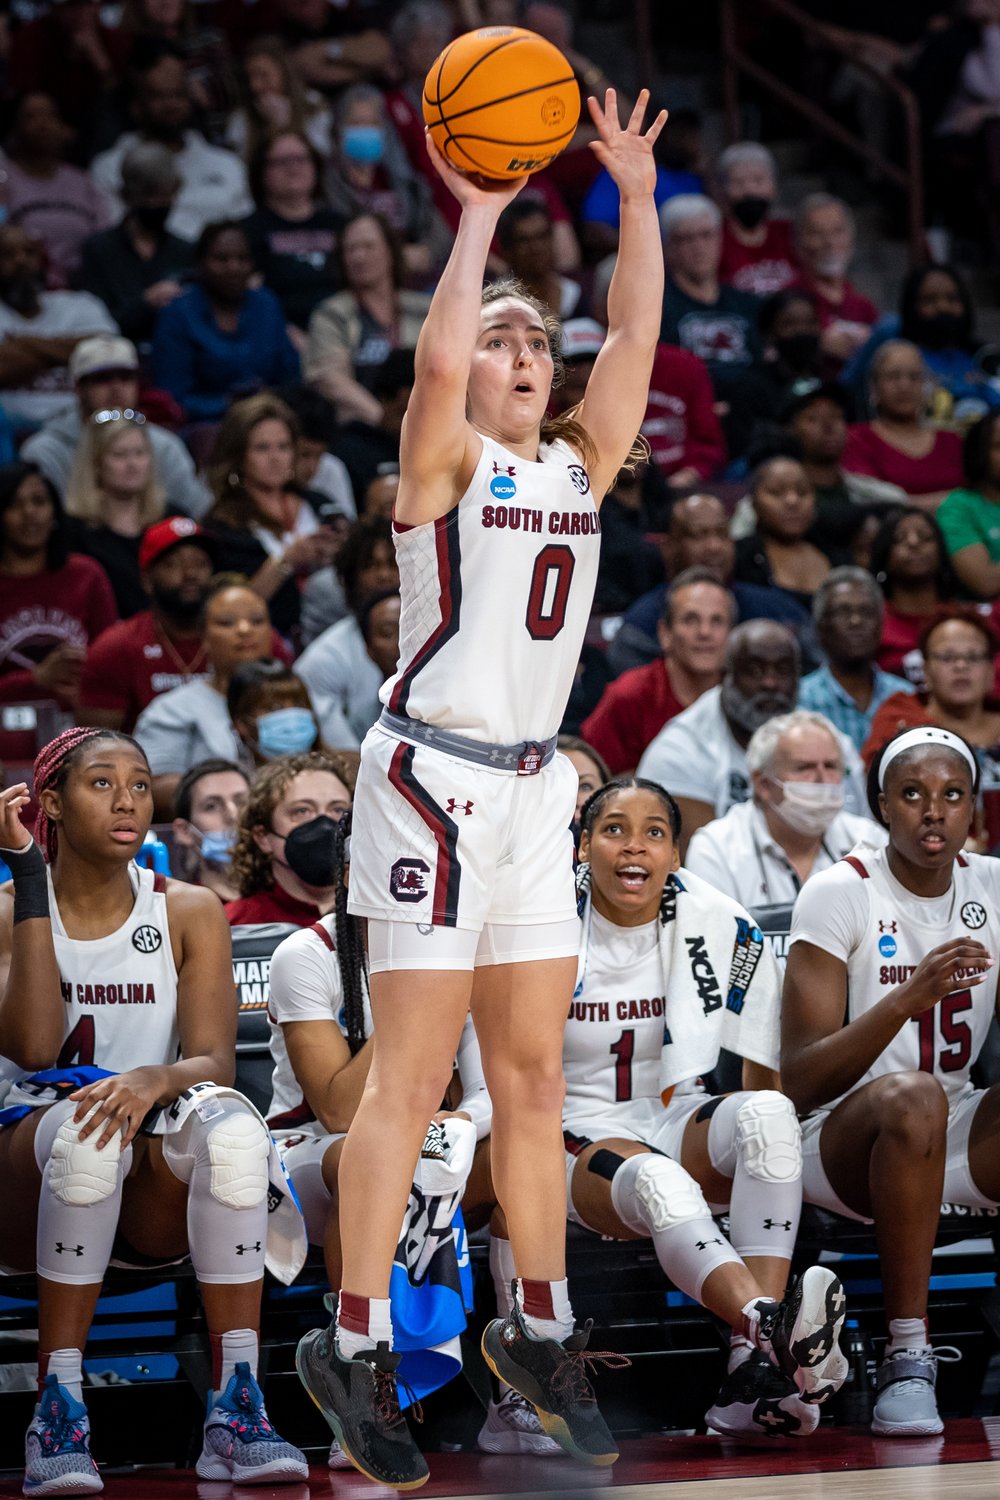 University of South Carolina guard Olivia Thompson, a graduate of Lexington High School, pulls up for one of her two, three-pointers in the NCAA Tournament first-round game against Howard University at Colonial Life Arena.